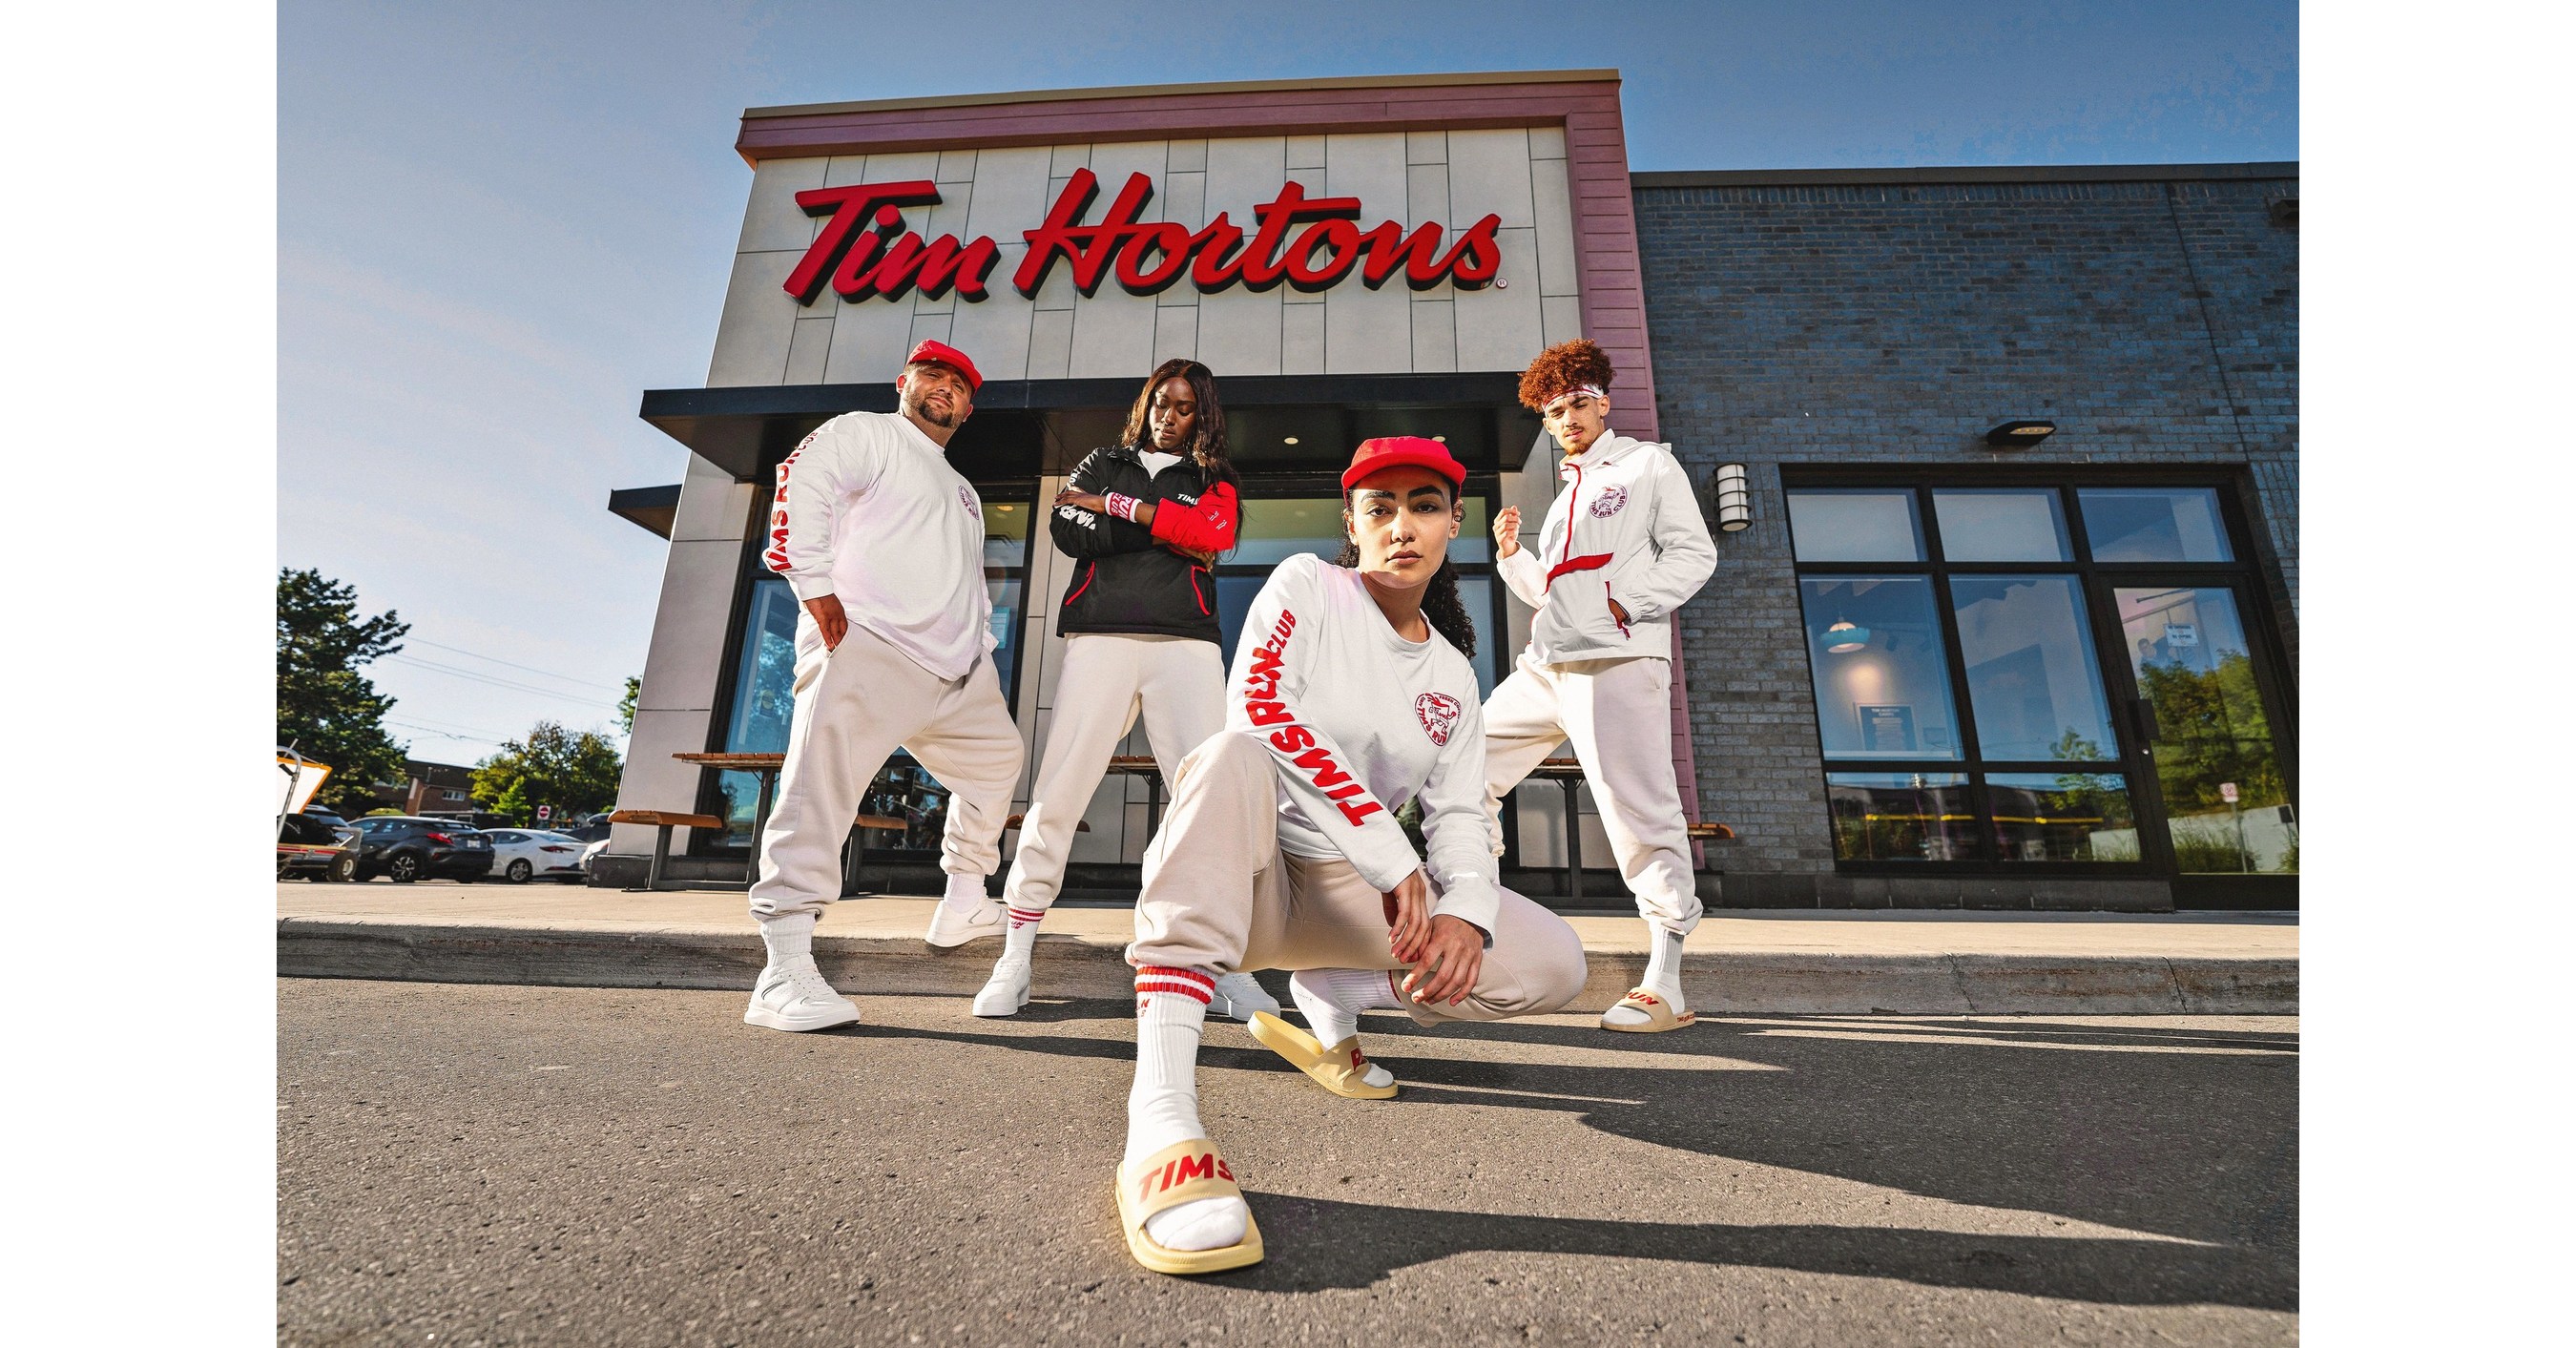 Tim Hortons® launches new Cold Brew coffee, made with 100% ethically  sourced premium Arabica beans and slowly steeped for 16 hours for an  incredibly smooth flavour